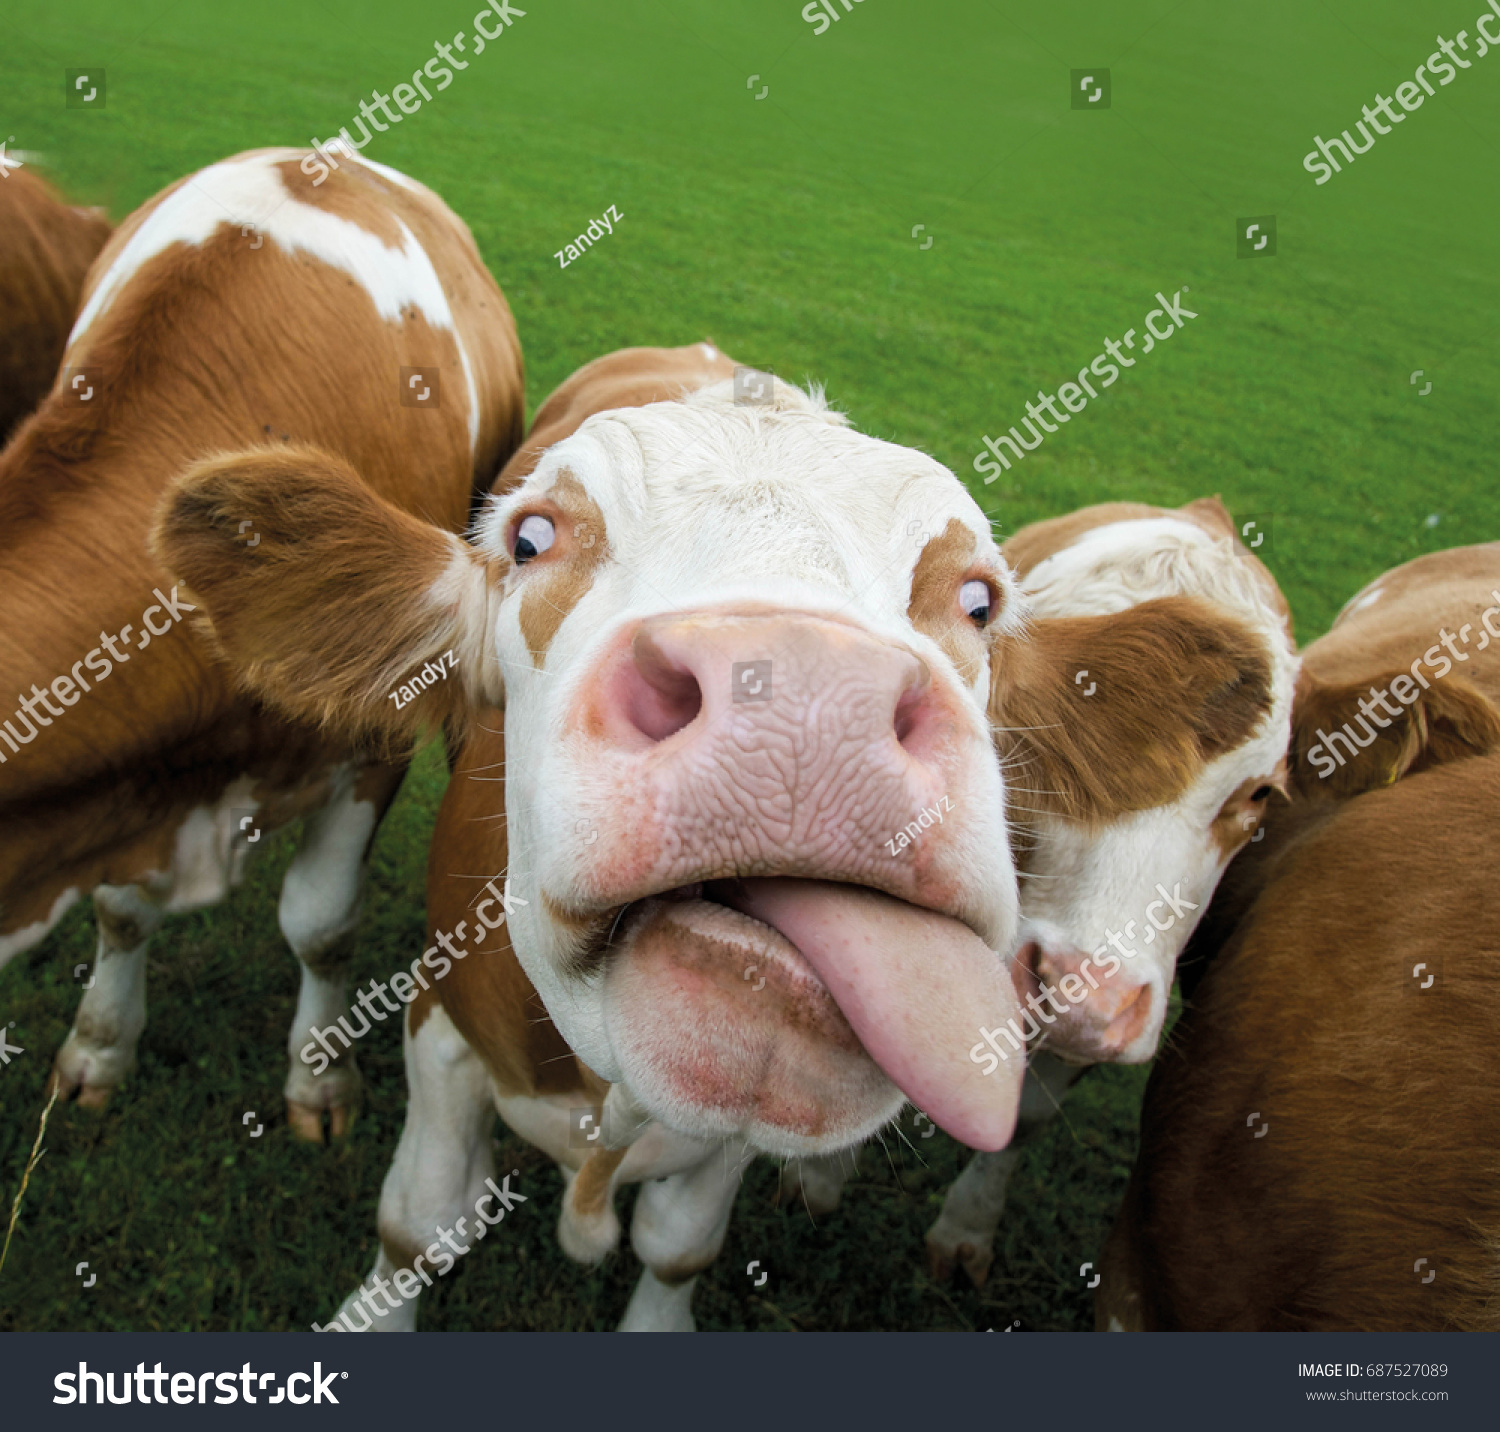 Cow showing tongue photo